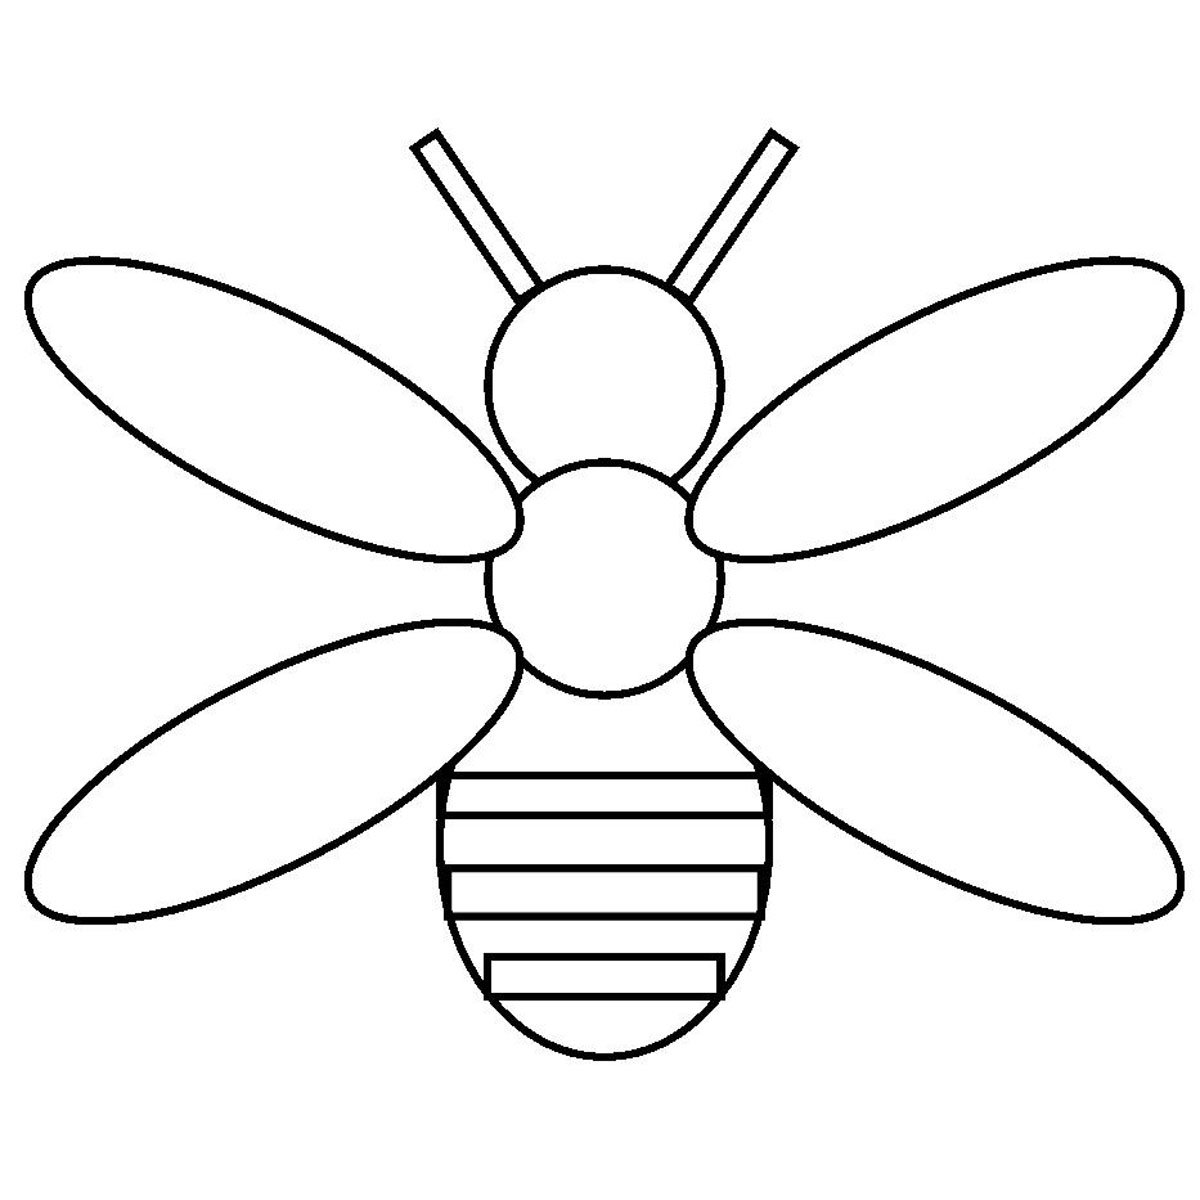 Picture Of A Bee Hive - ClipArt Best